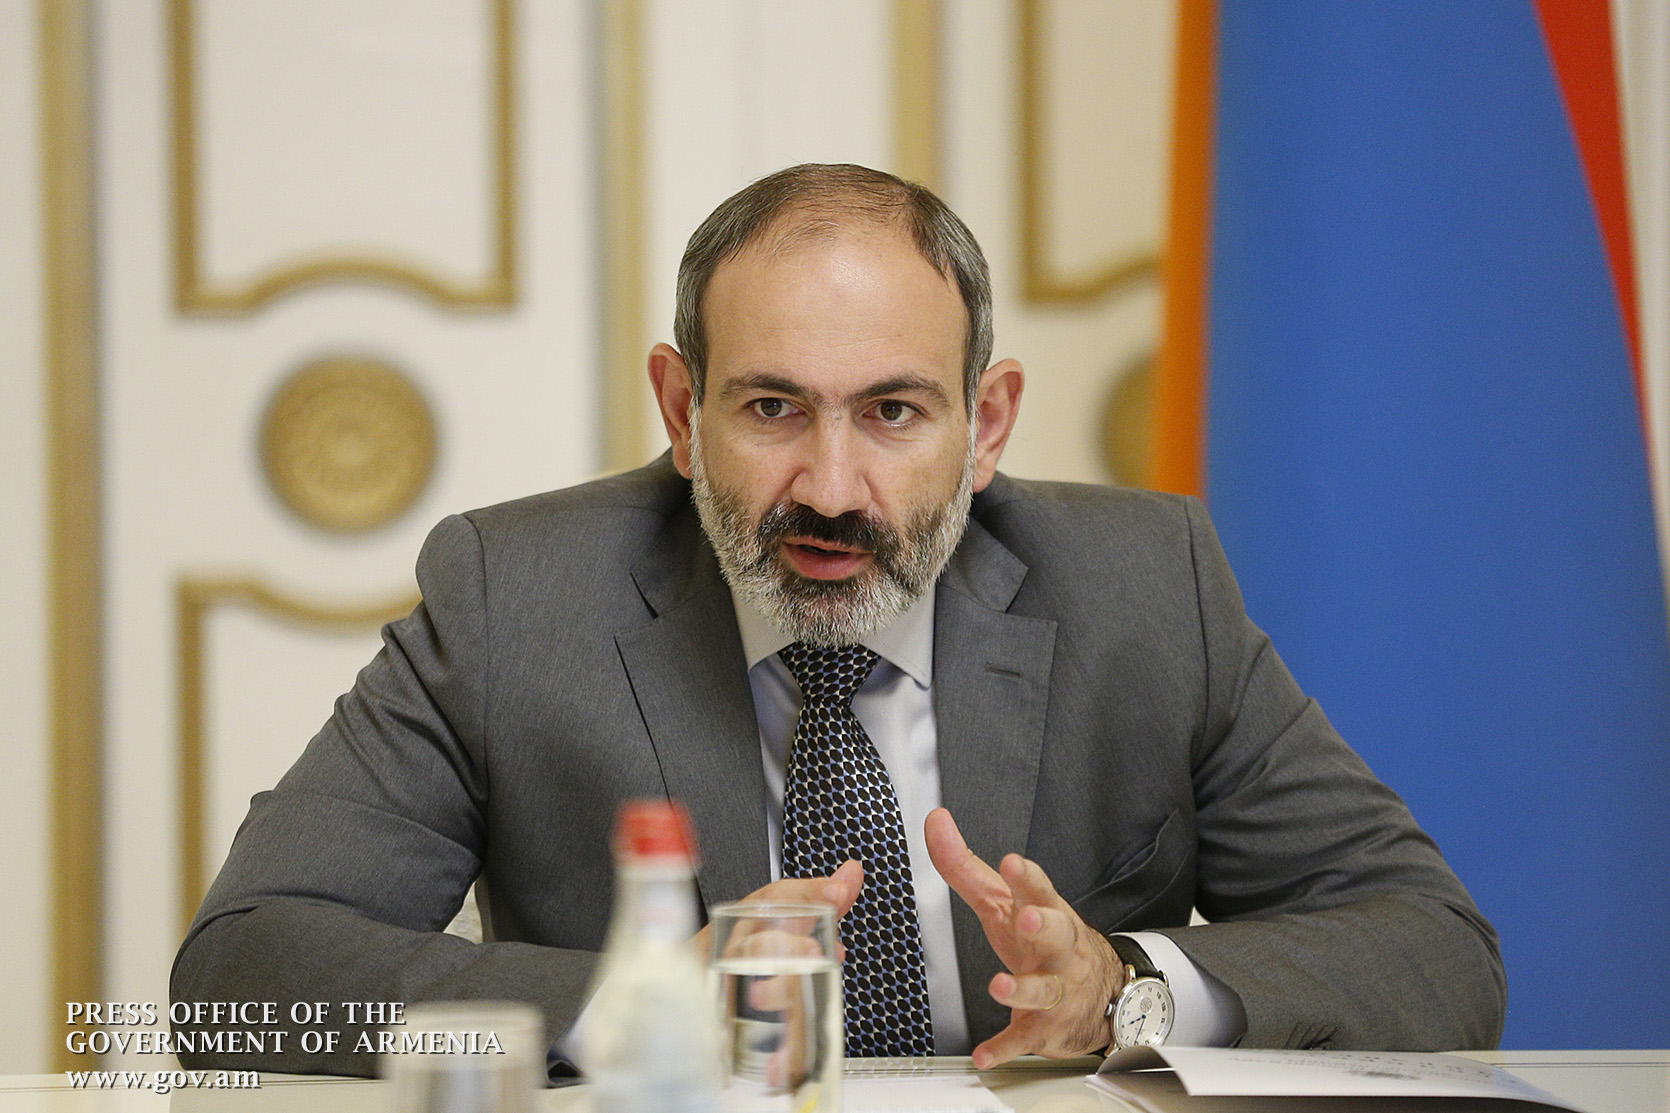 Nikol Pashinyan: “I am convinced that through joint work we will shape completely new police-citizen relations”